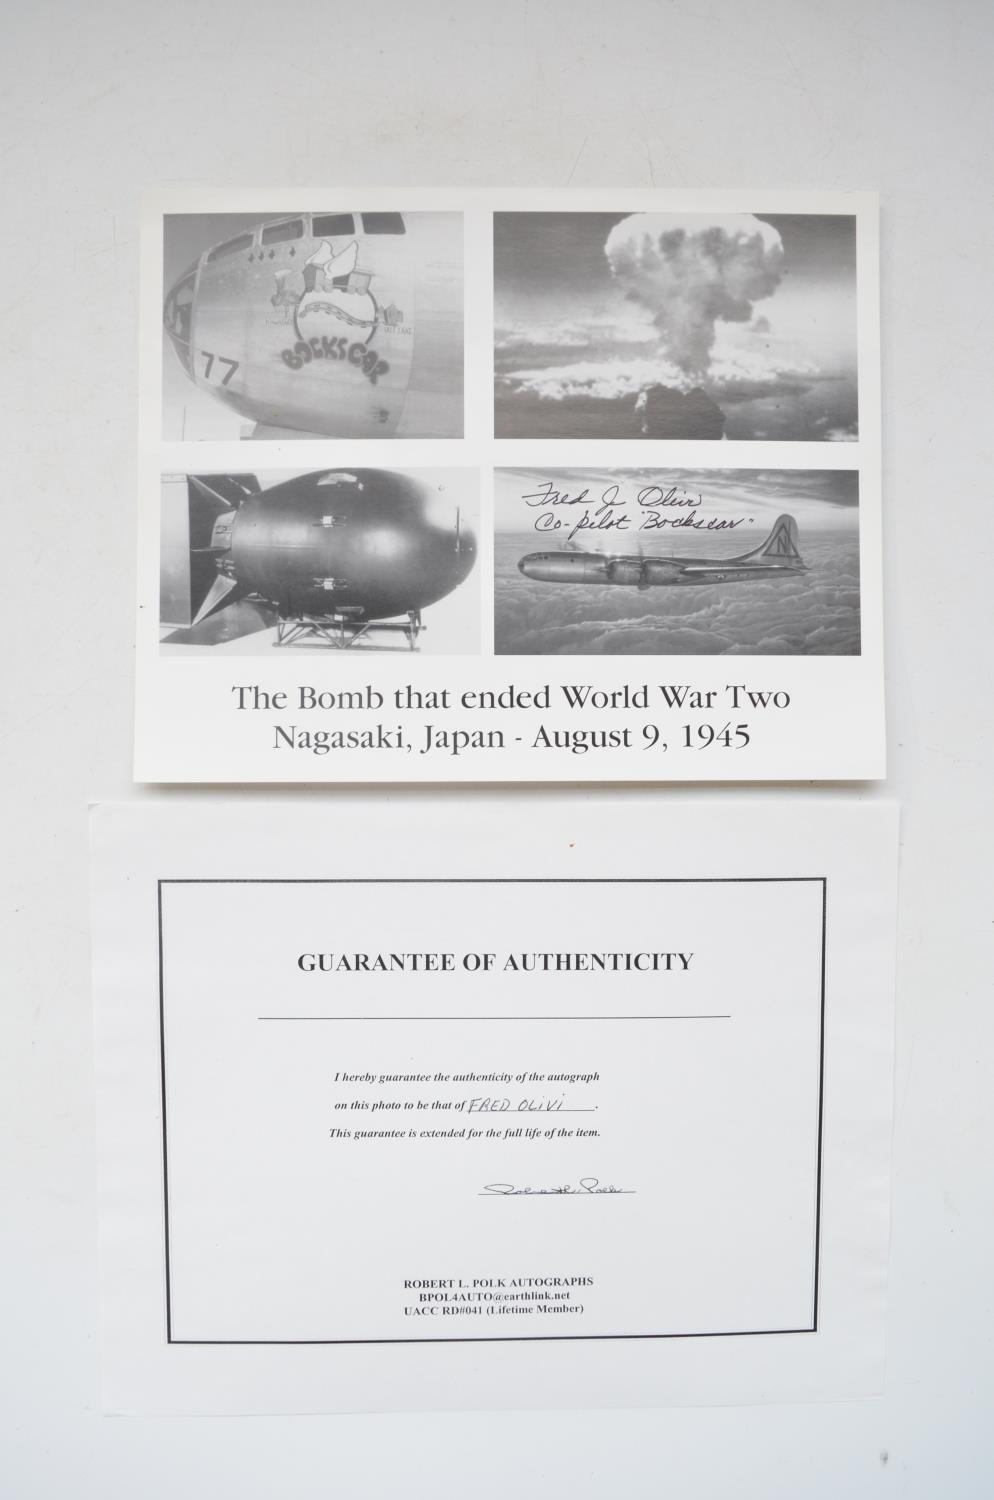 Photographic montage of 2nd atomic bomber Bockscar, signed by Co-pilot Fred Olivi with CoA - Image 2 of 2